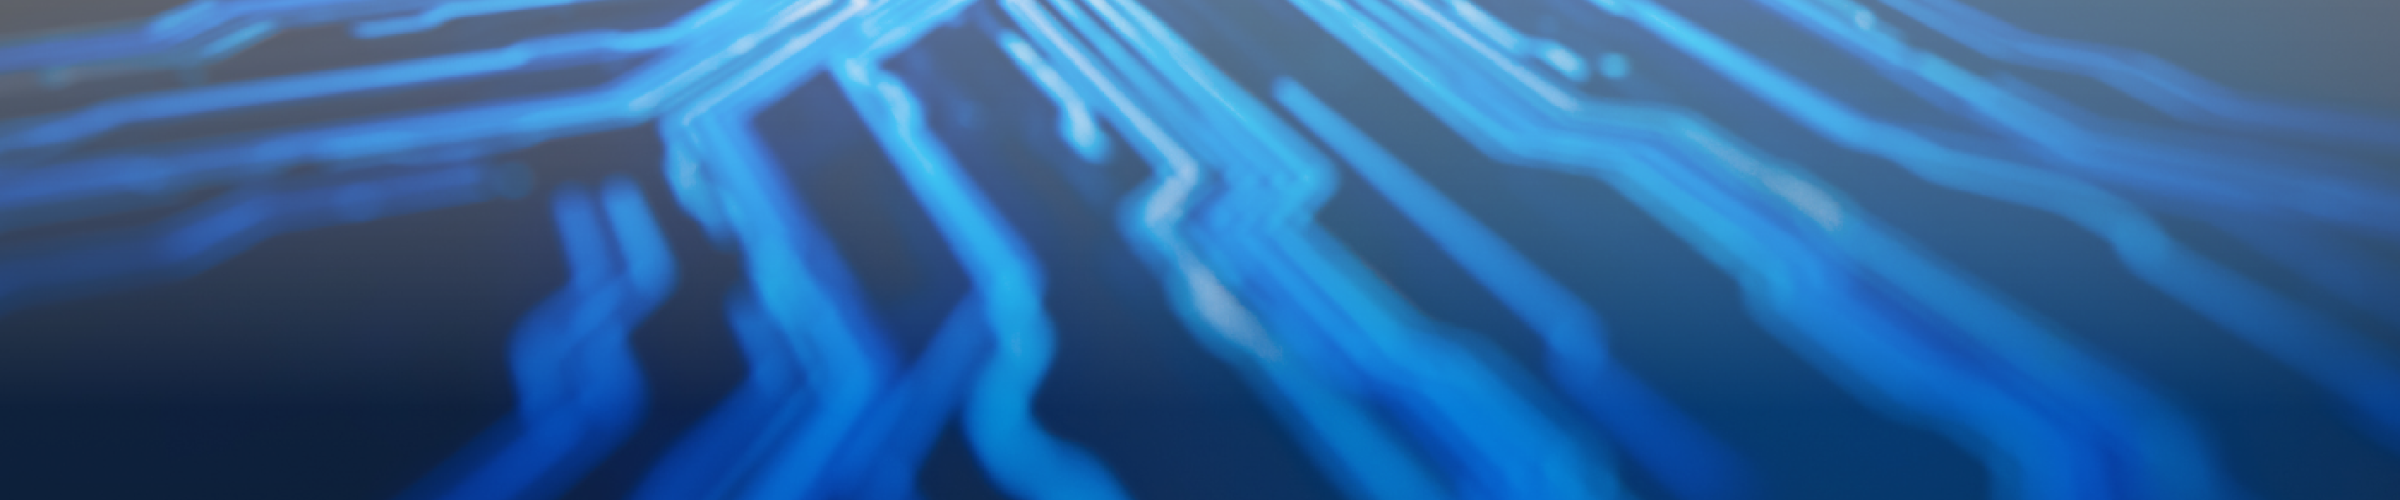 A color graphic with a blue background and white lines representing a close-up view of a computer chip